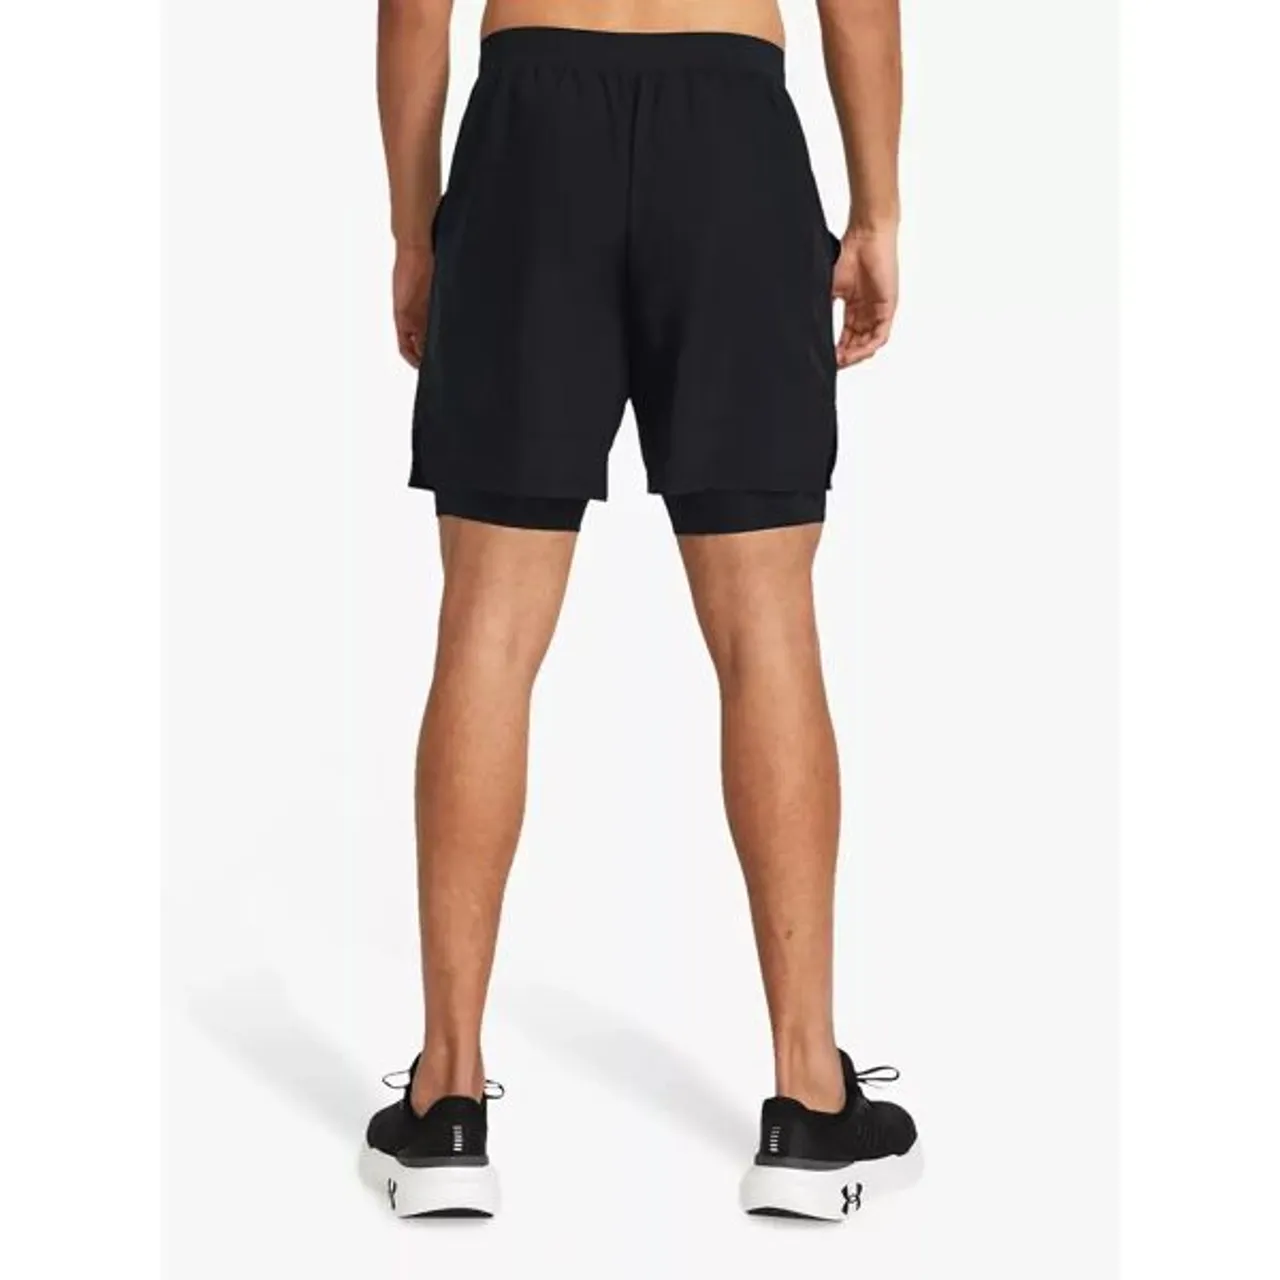 Under Armour Launch 2-in-1 Running Shorts, Black/Reflective - Black/Reflective - Male